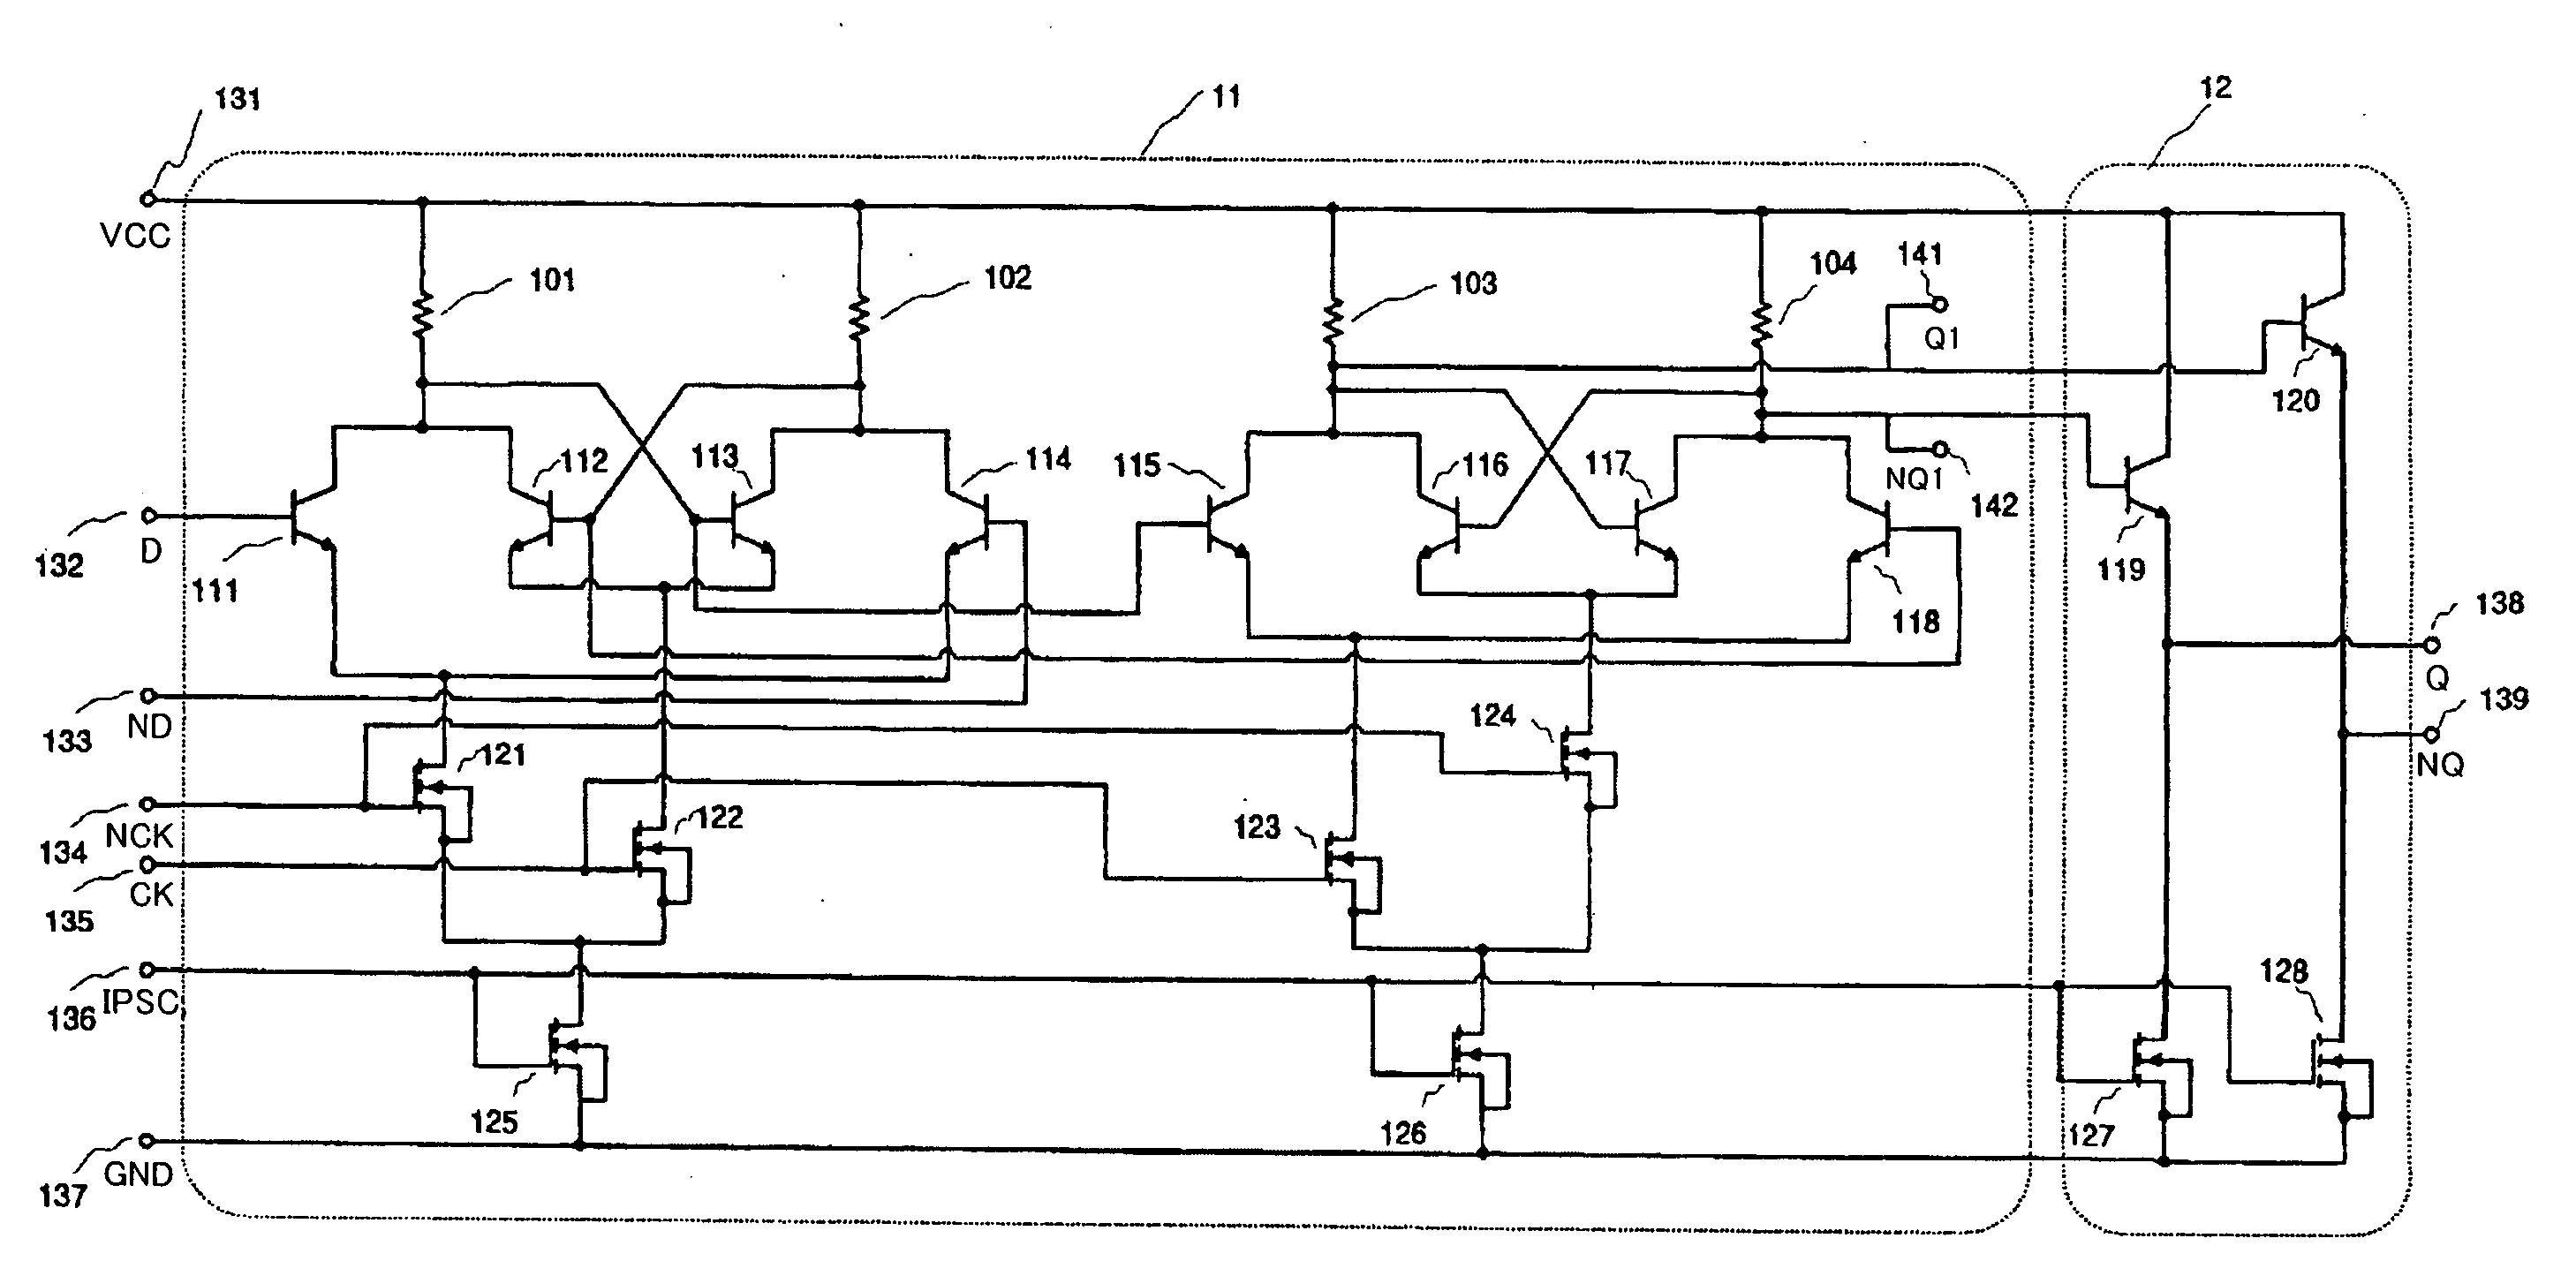 Flip-flop circuit and frequency division circuit using same